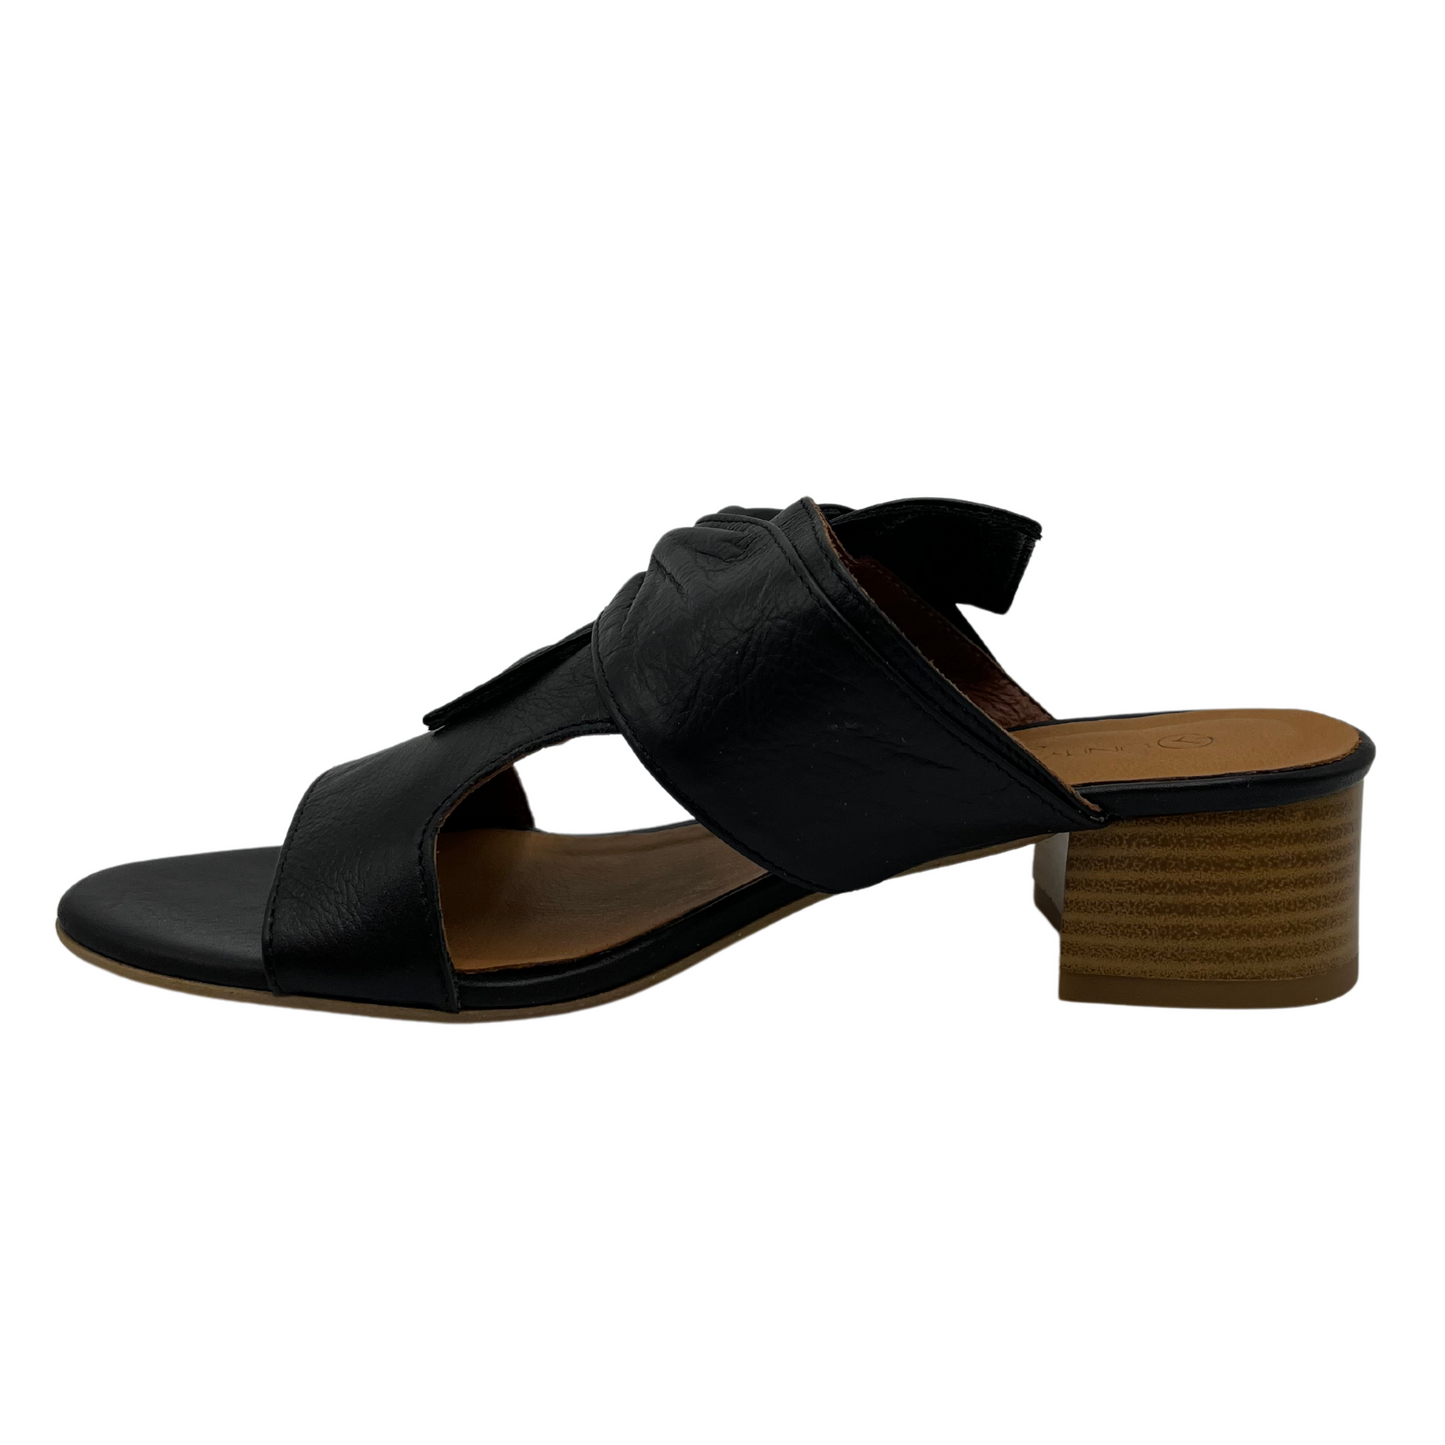 Left facing view of black leather sandal with block heel and knot detail.